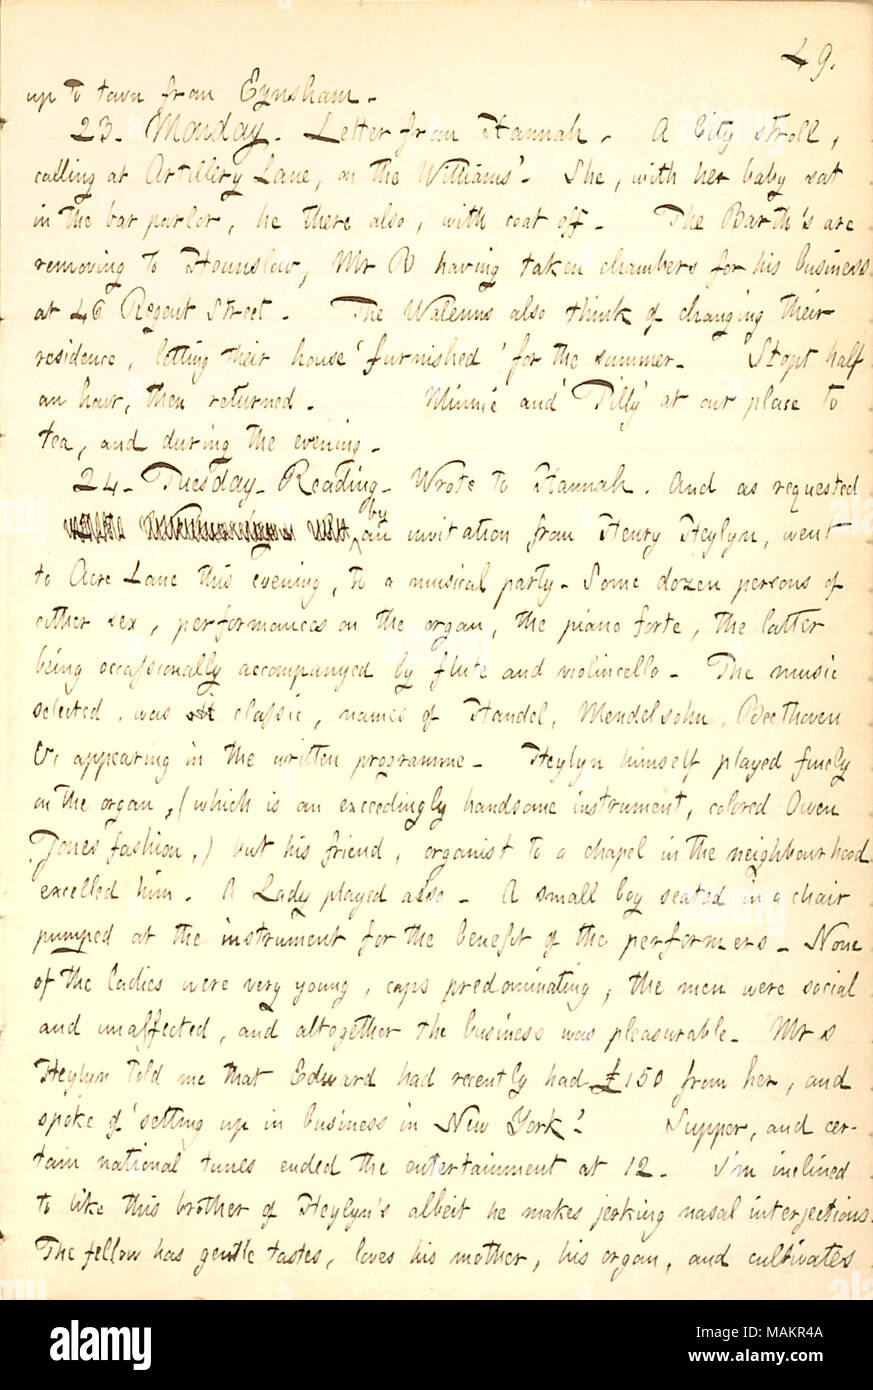 Describes attending a musical performance by Henry Heylyn and others.  Transcription: up to town from Eynsham. 23. Monday. Letter from Hannah [Bennett]. A City stroll, calling at Artillery Lane, on the Williams ?. She [Eliza Williams], with her baby sat in the bar parlor, he there also, with coat off. The Barth ?s are removing to Hounslow, Mr B having taken chambers for his business at 46 Regent Street. The Walems also think of changing their residence, letting their house  ?furnished ? for the summer. Stopt half an hour, then returned. Minnie [Gunn] and  ?Tilly [Jenkins] ? at our place to tea Stock Photo